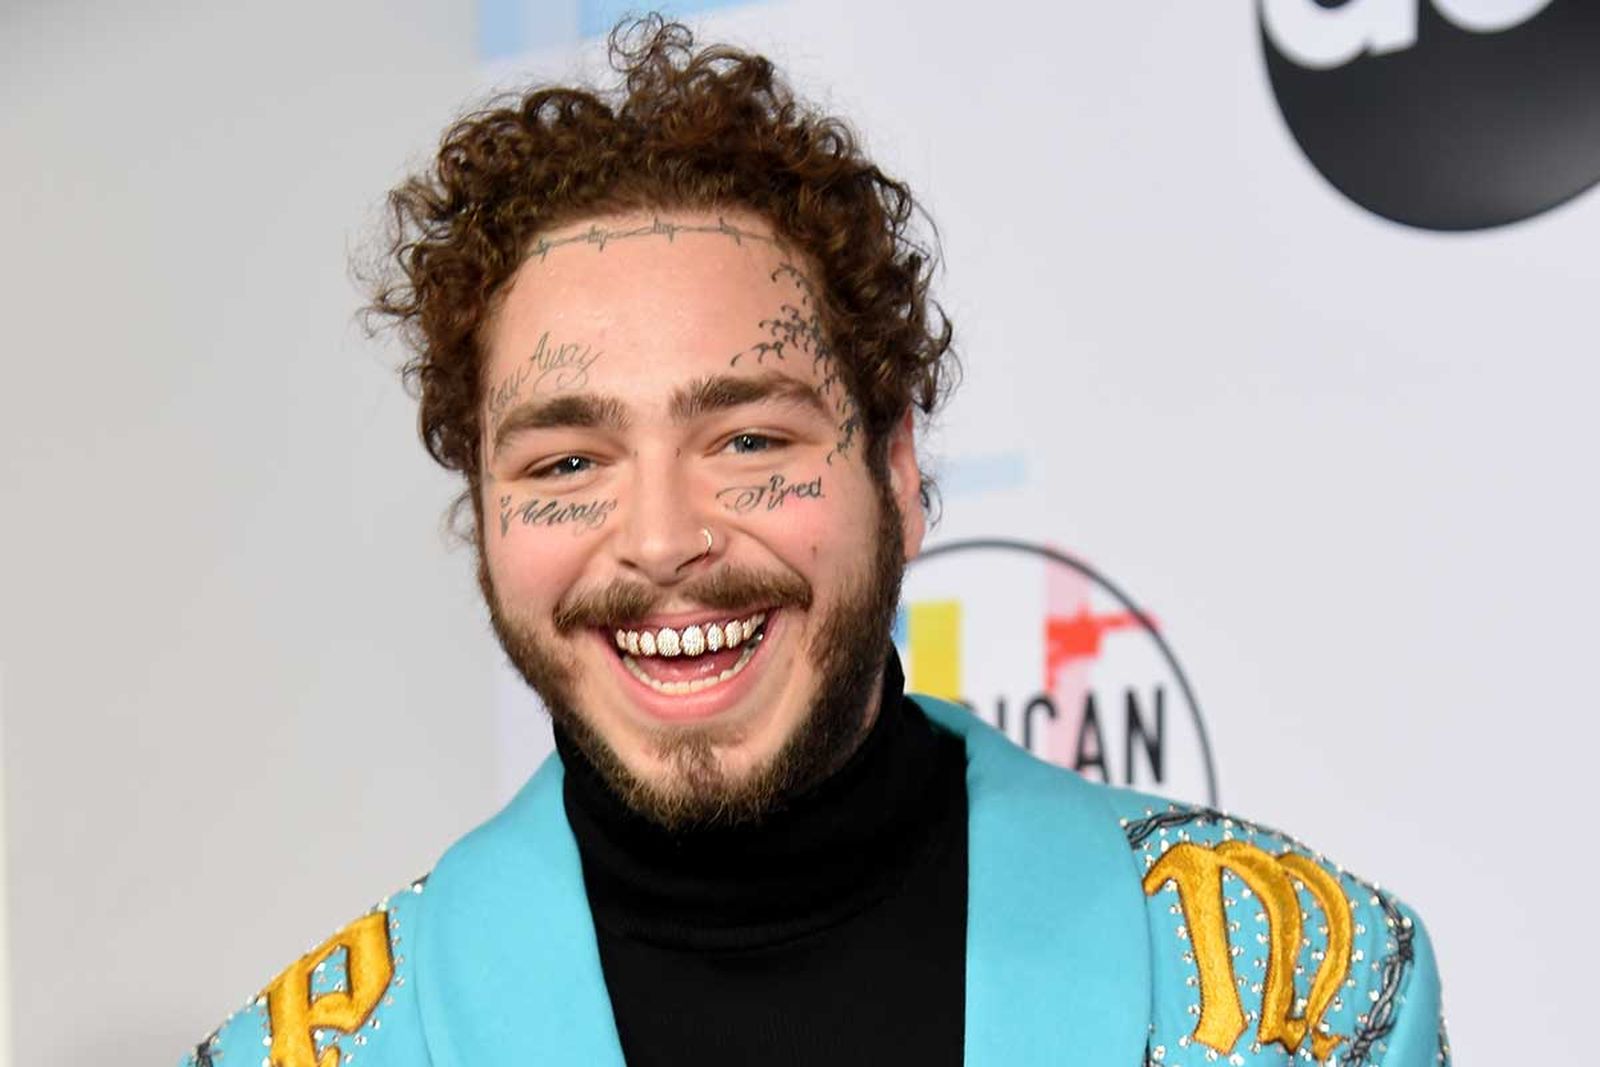 Post Malone smiling at the 2018 American Music Awards